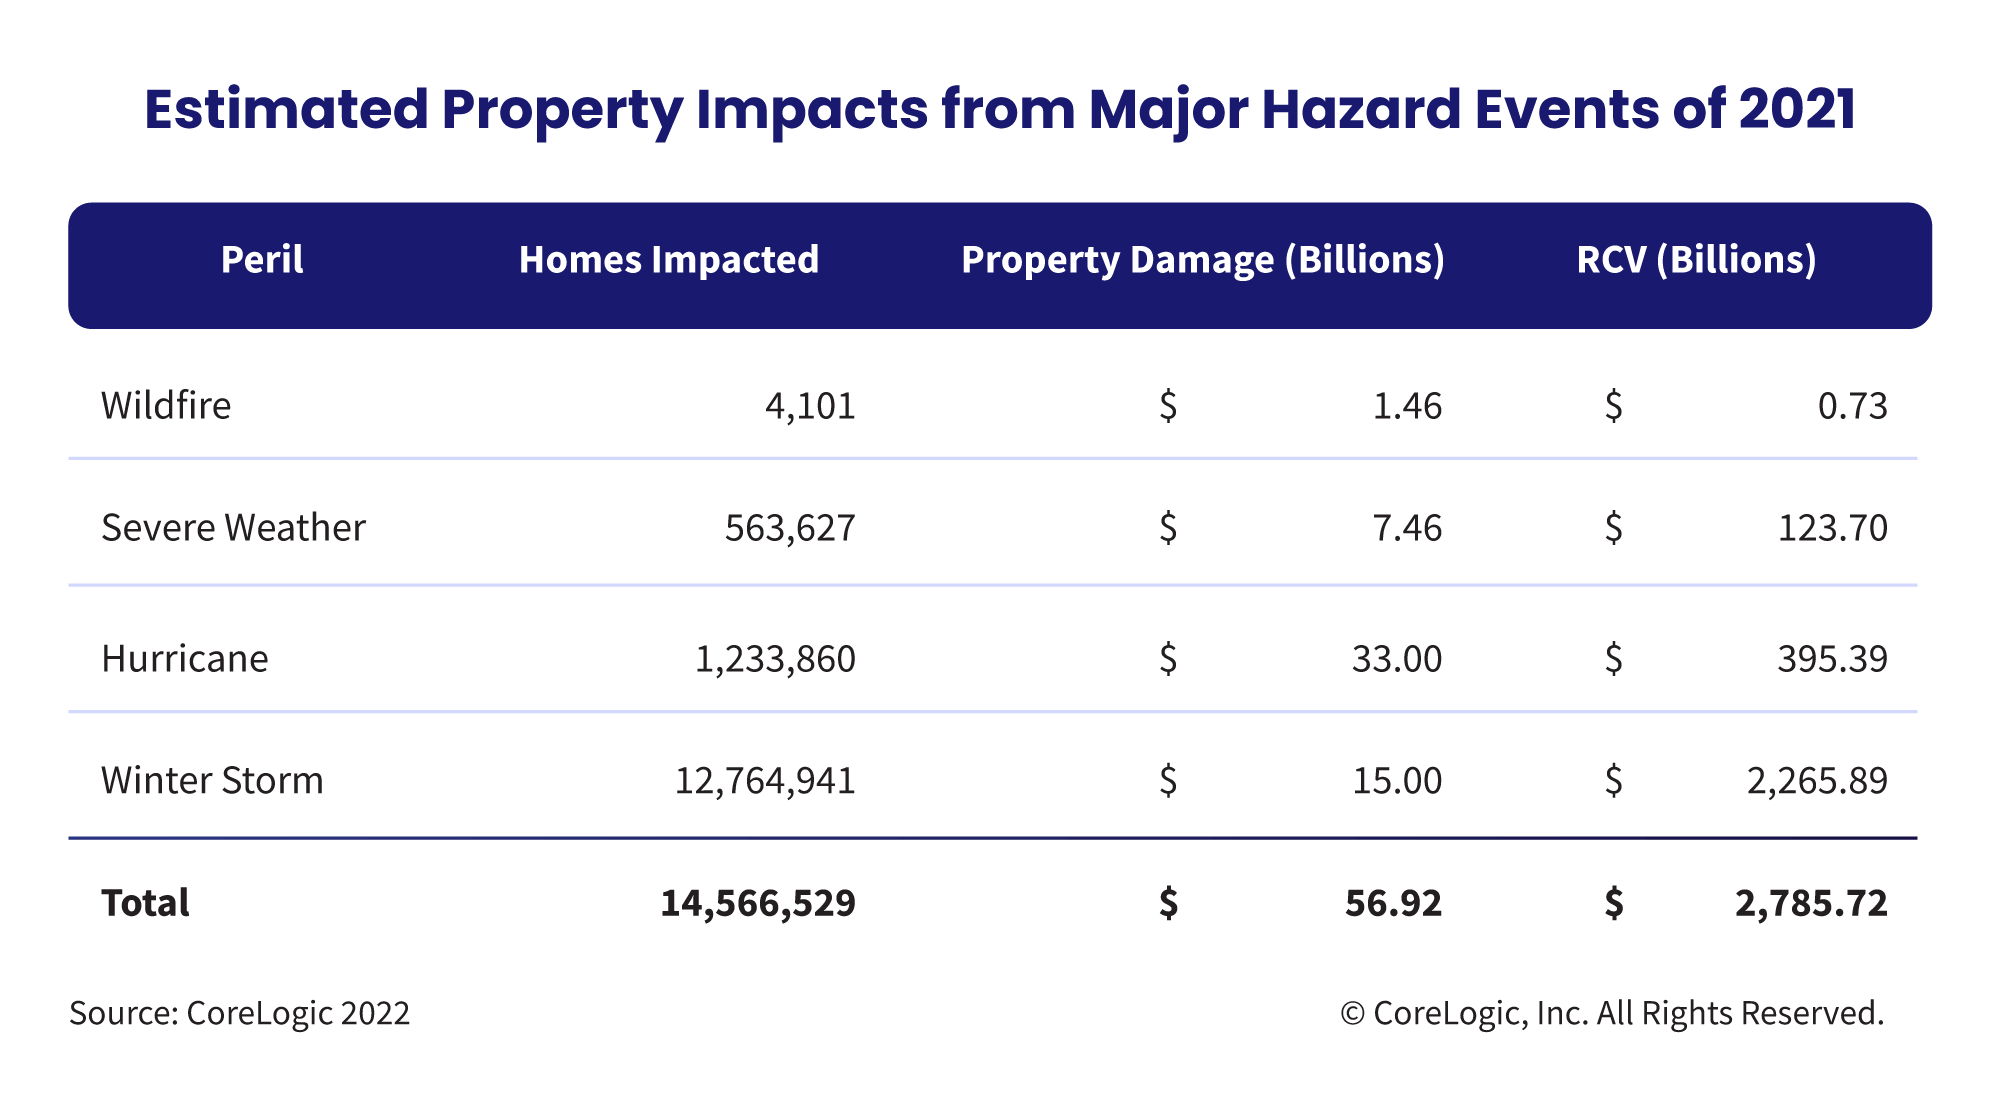 Figure 1  Estimated Property Impacts from Major Hazard Events of 2021